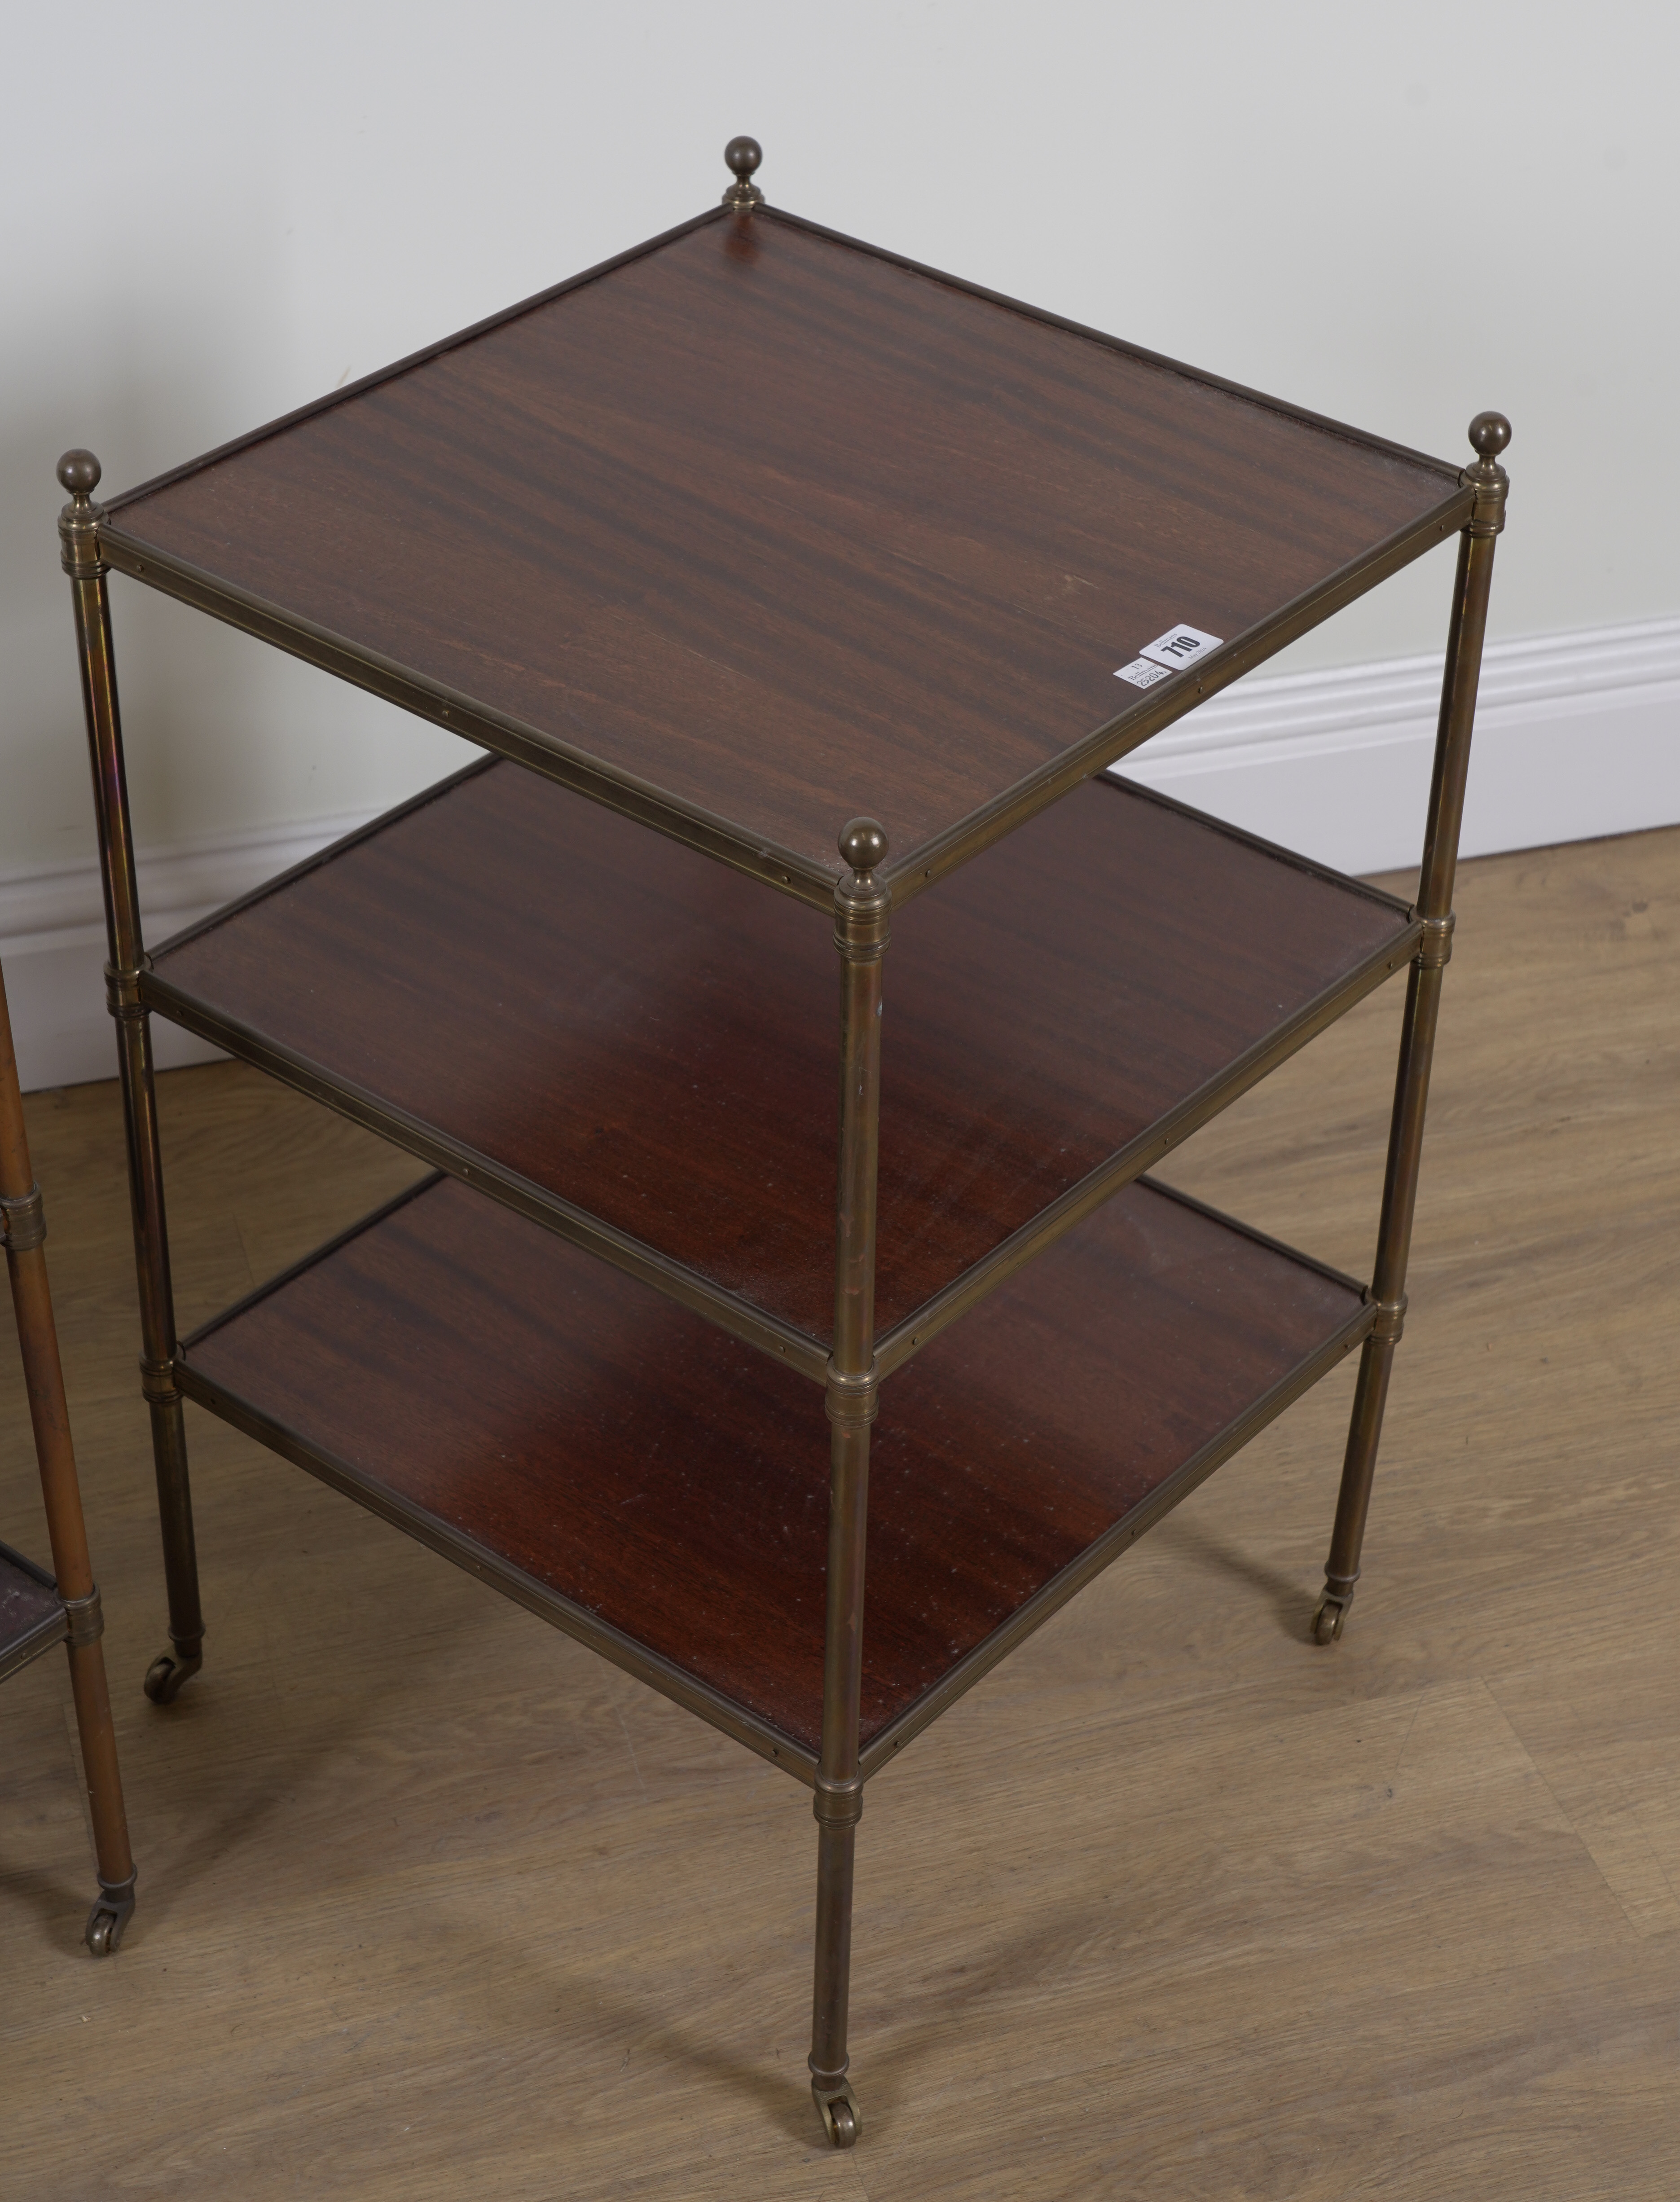 A PAIR OF MID 20TH CENTURY LACQUERED BRASS AND MAHOGANY SQUARE THREE TIER ETAGERES (2) - Image 4 of 4